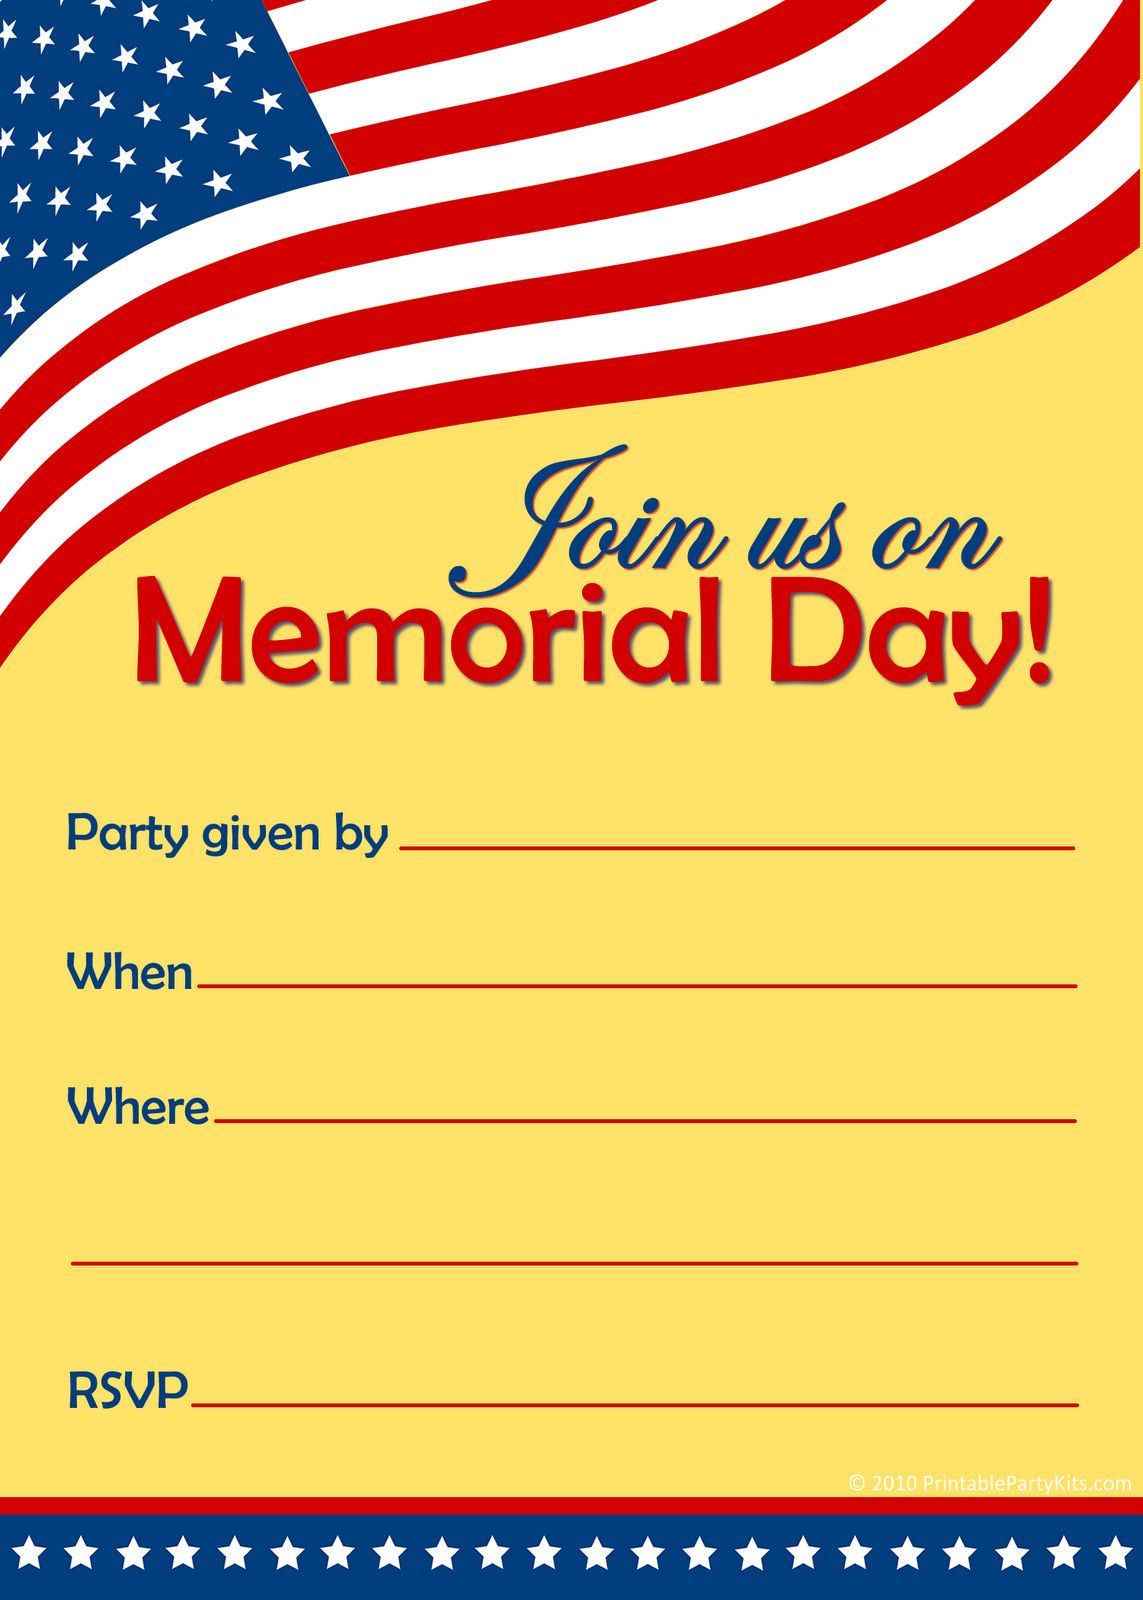 Memorial Day Party Invitations
 Free Printable Party Invitations Free Invitations for a